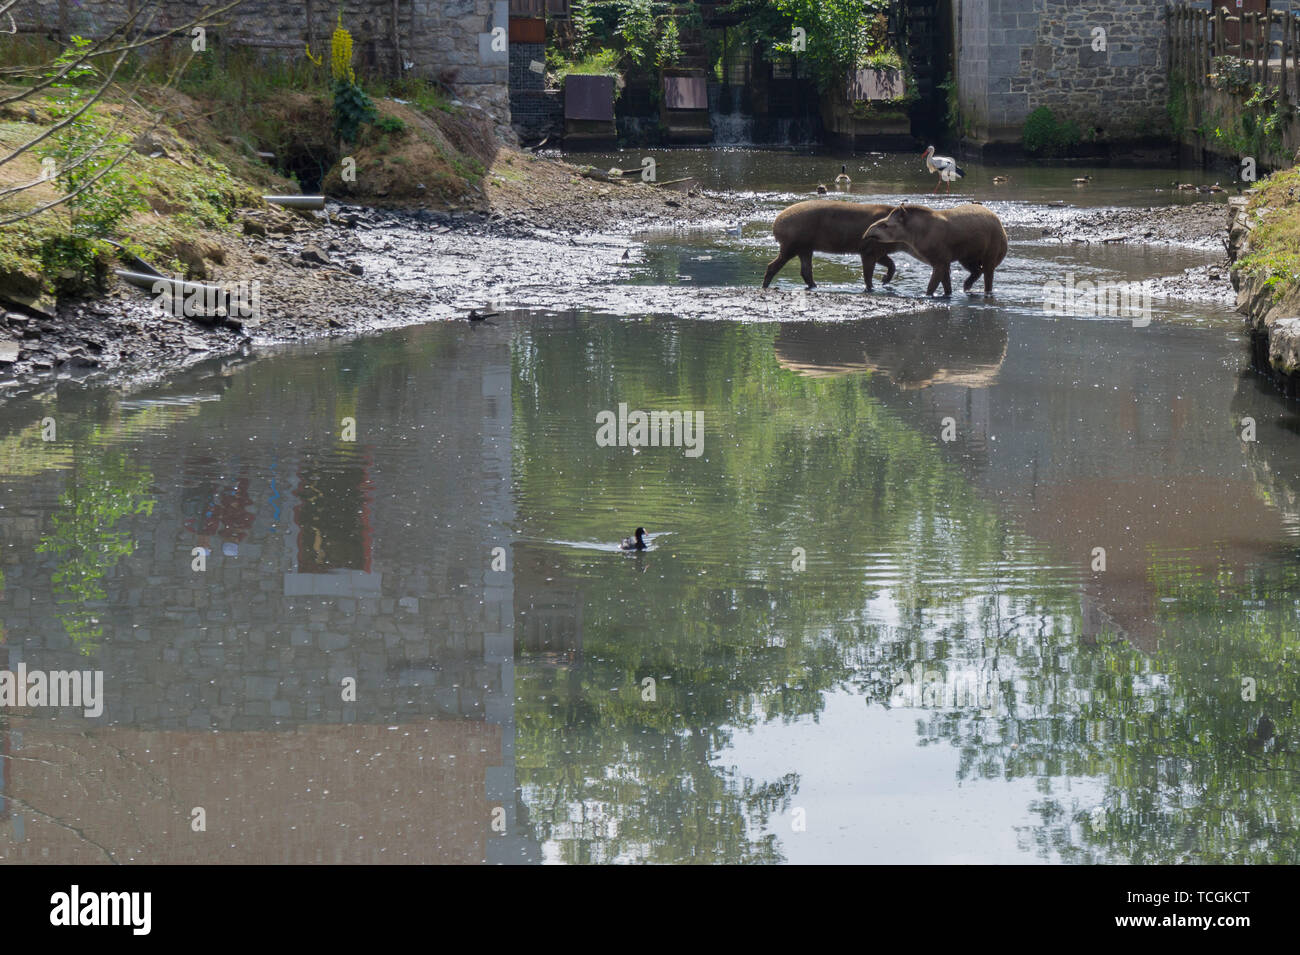 Two tapirs intersect in a pond Stock Photo